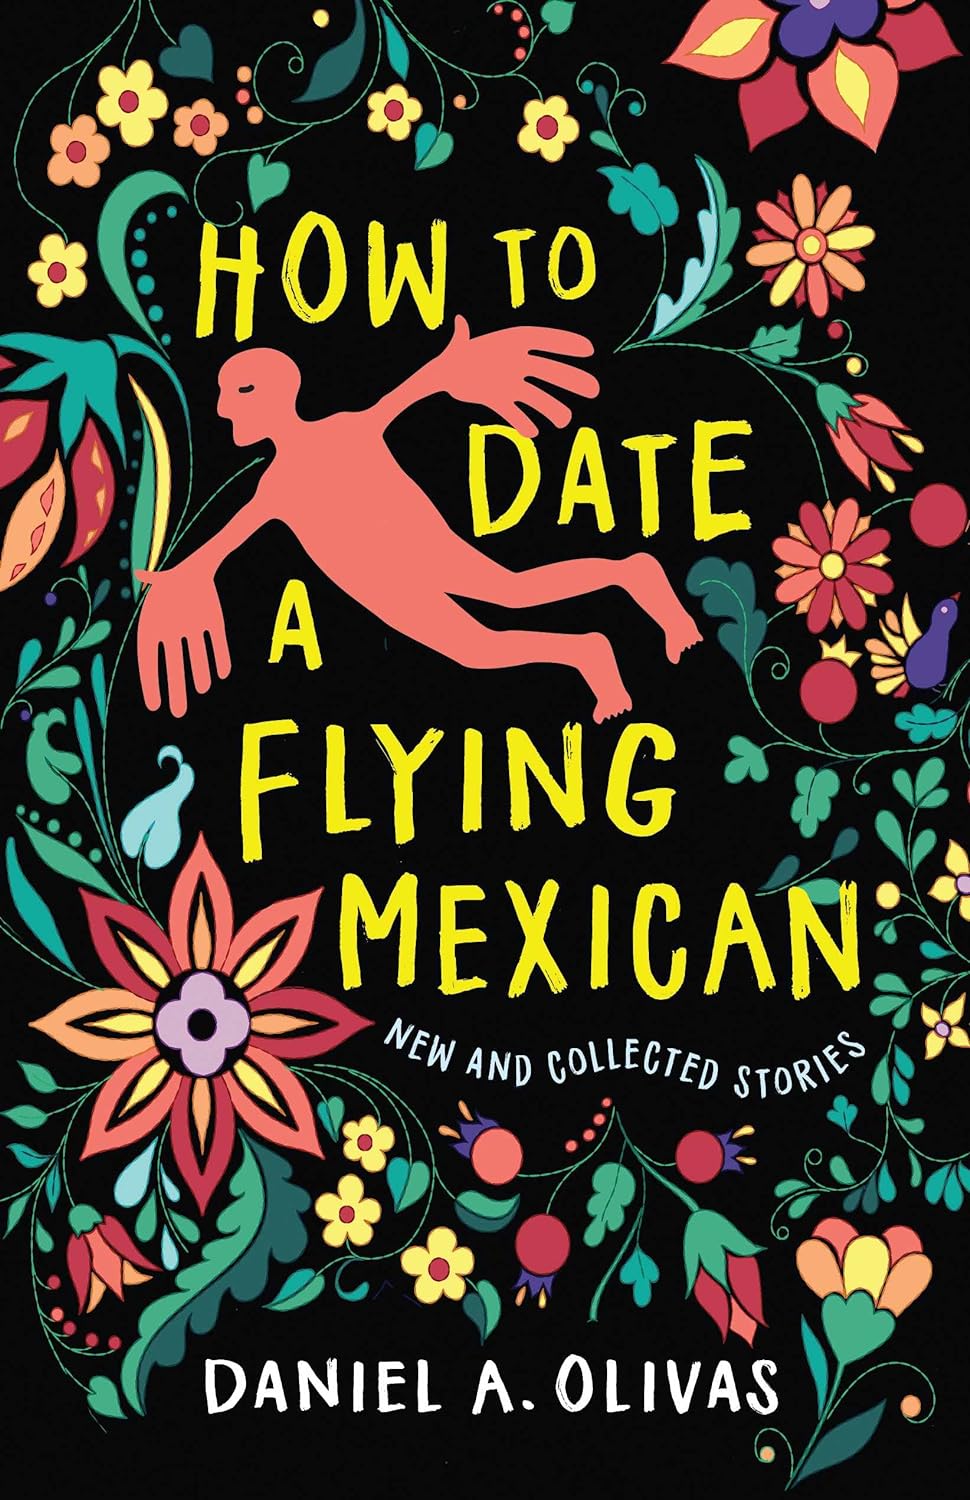 How to Date a Flying Mexican: New and Collected Stories book jacket